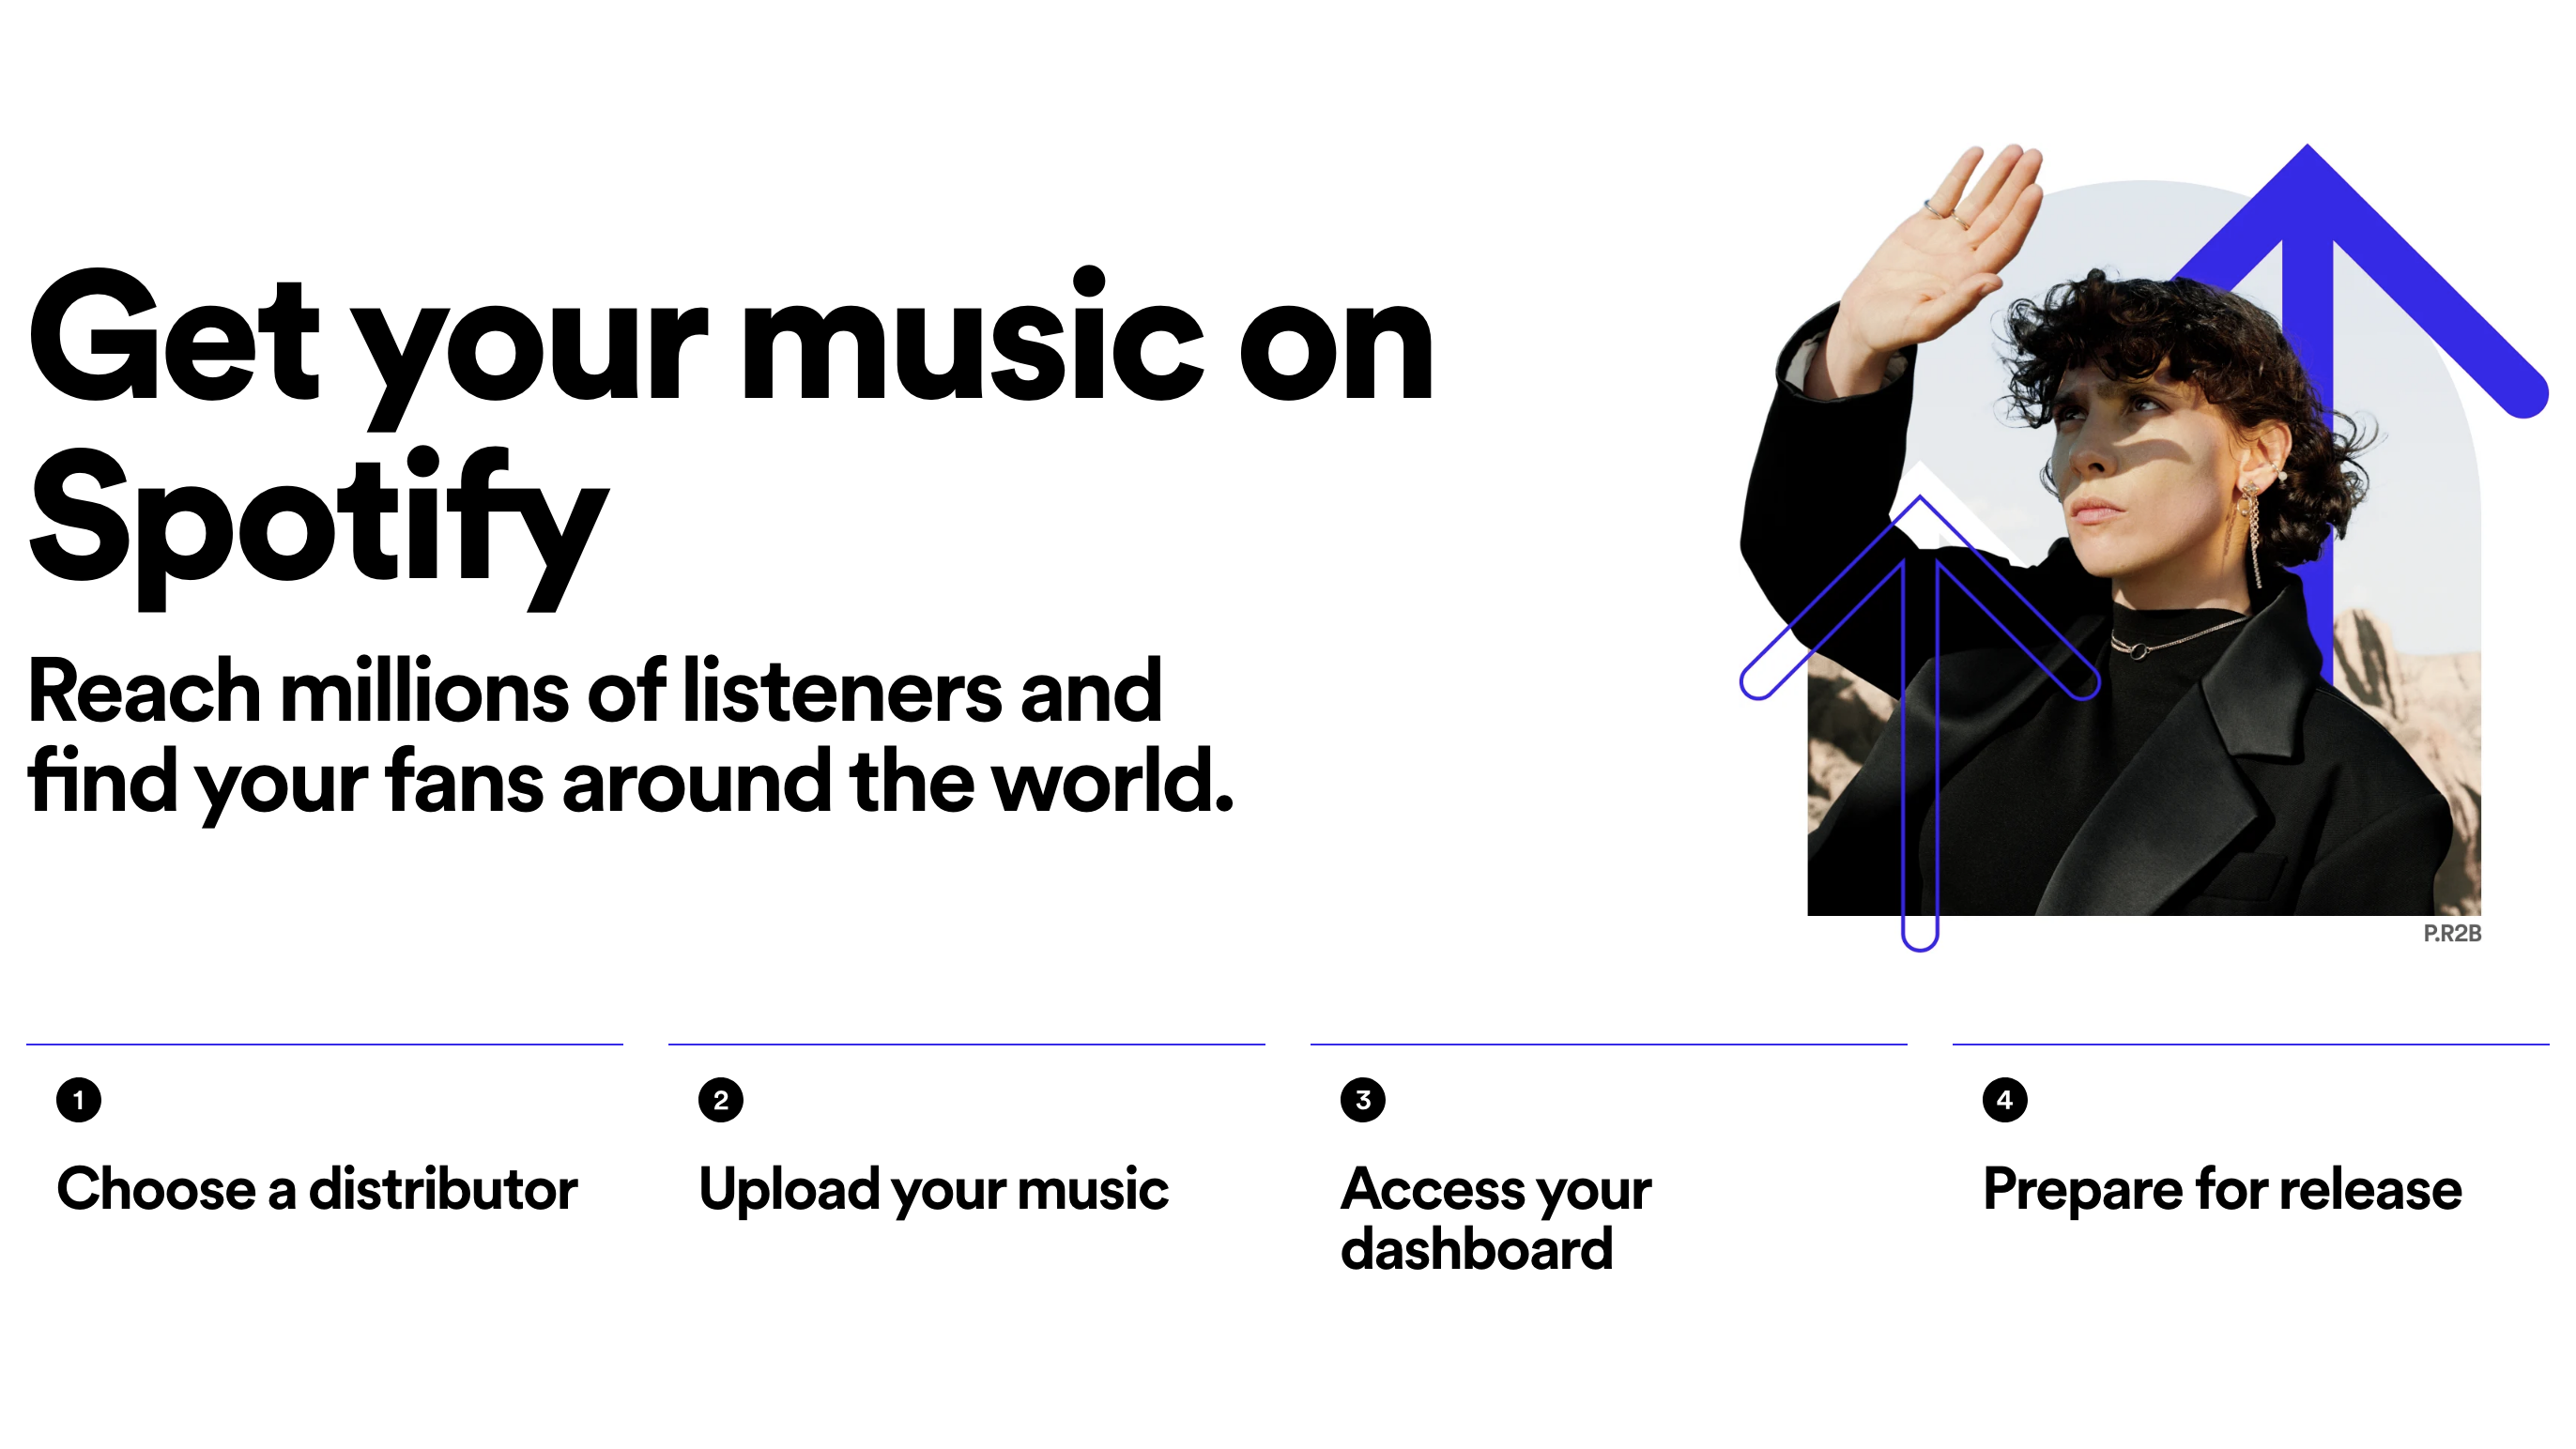 Spotify officially recommends RouteNote for distribution